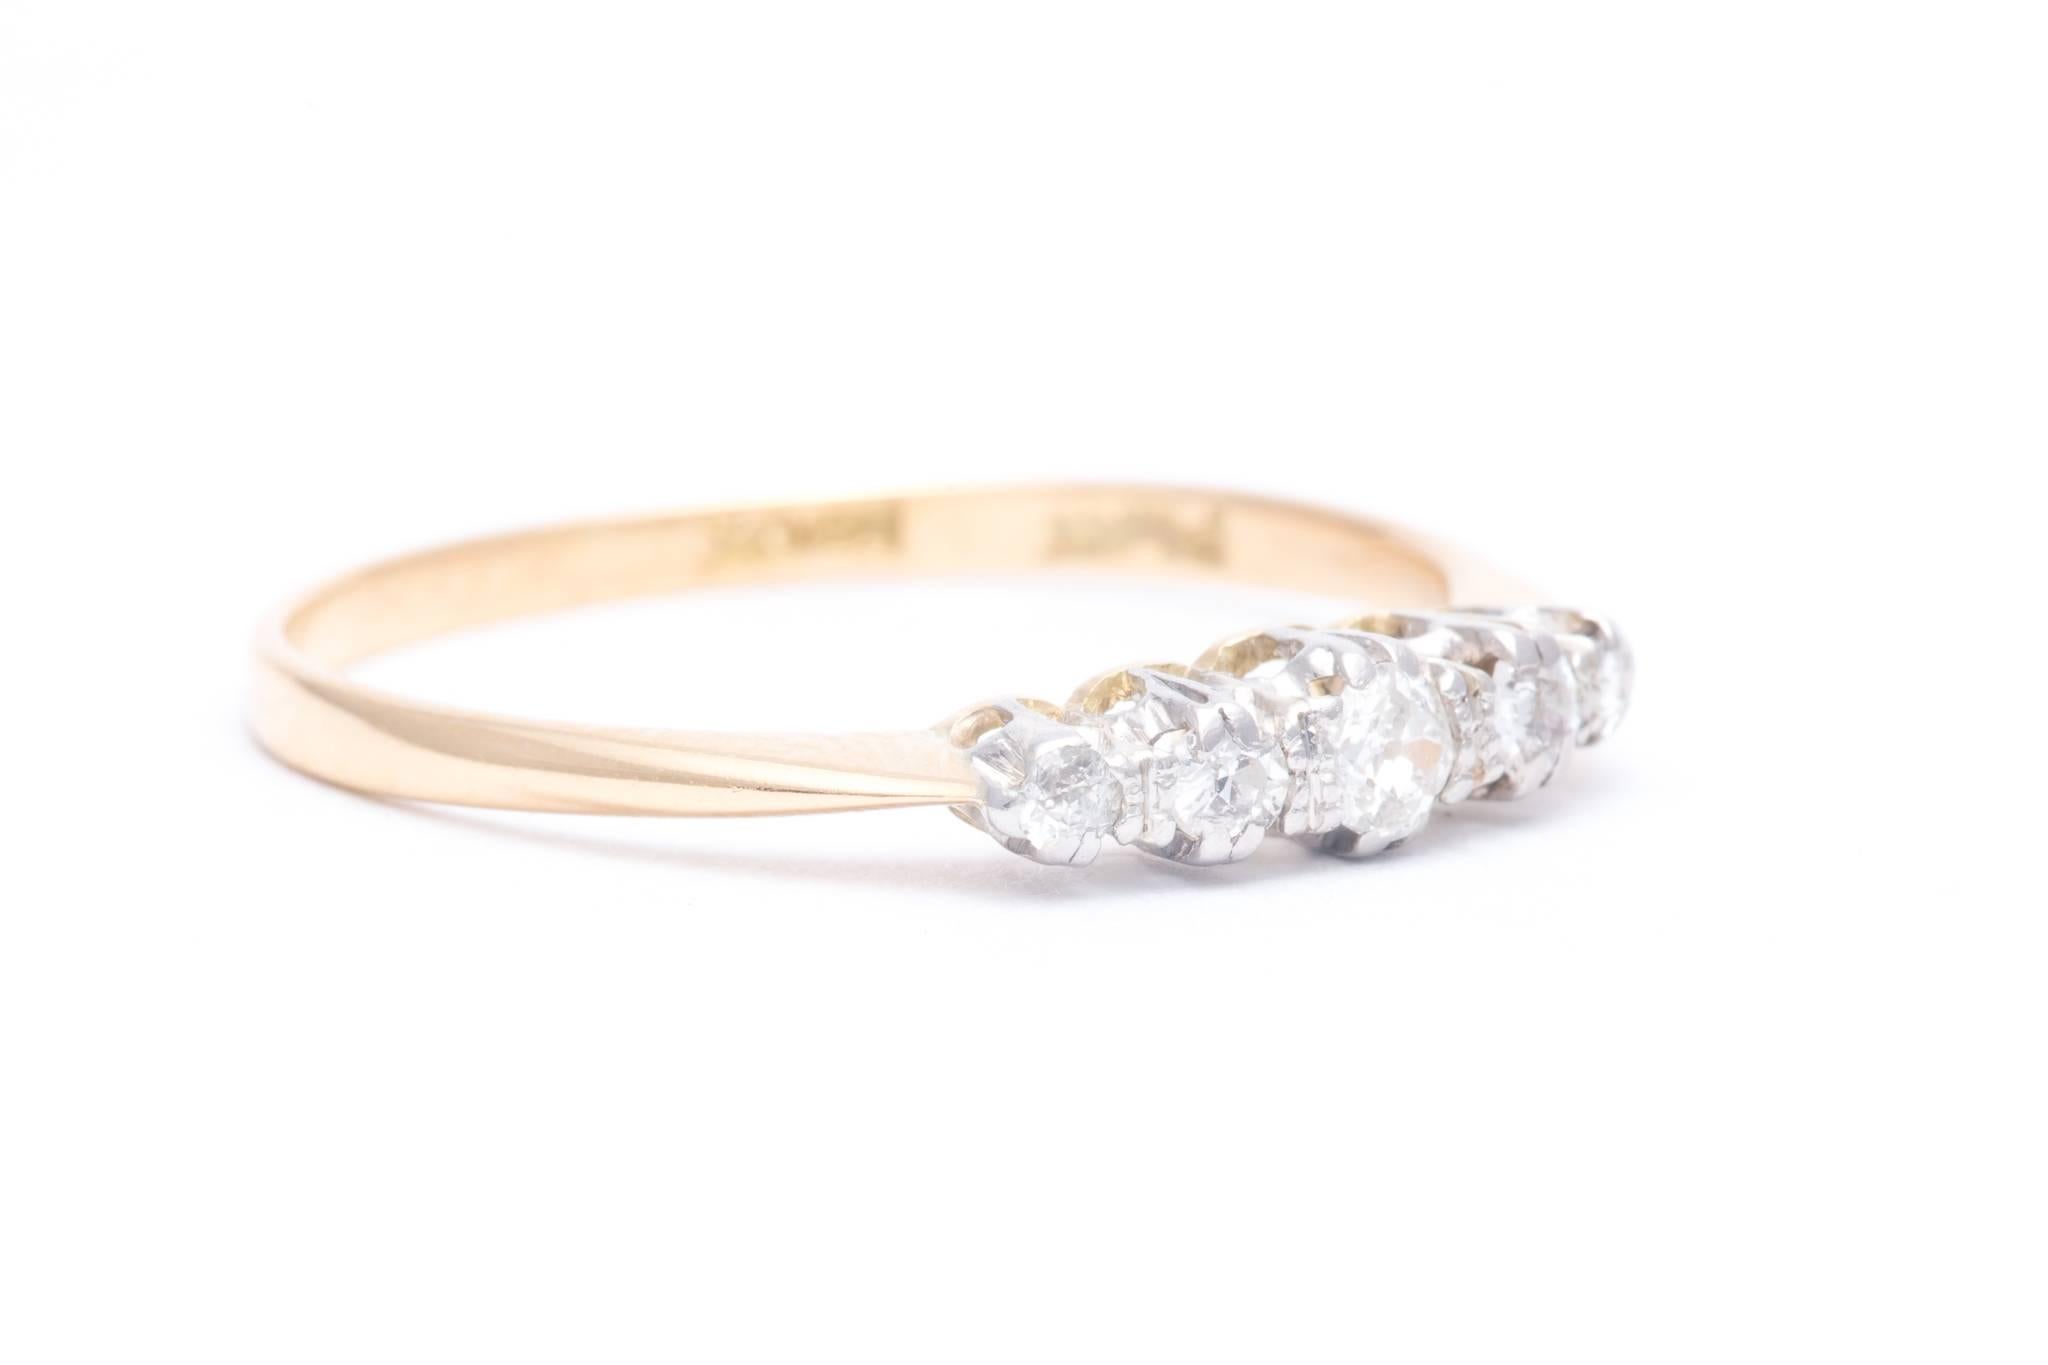 An early 20th century English made diamond wedding band in platinum and 18 karat yellow gold.  Set with five graduated antique mine cut diamonds weighing a combined 0.24 carats this ring will go perfectly with any yellow gold or platinum engagement